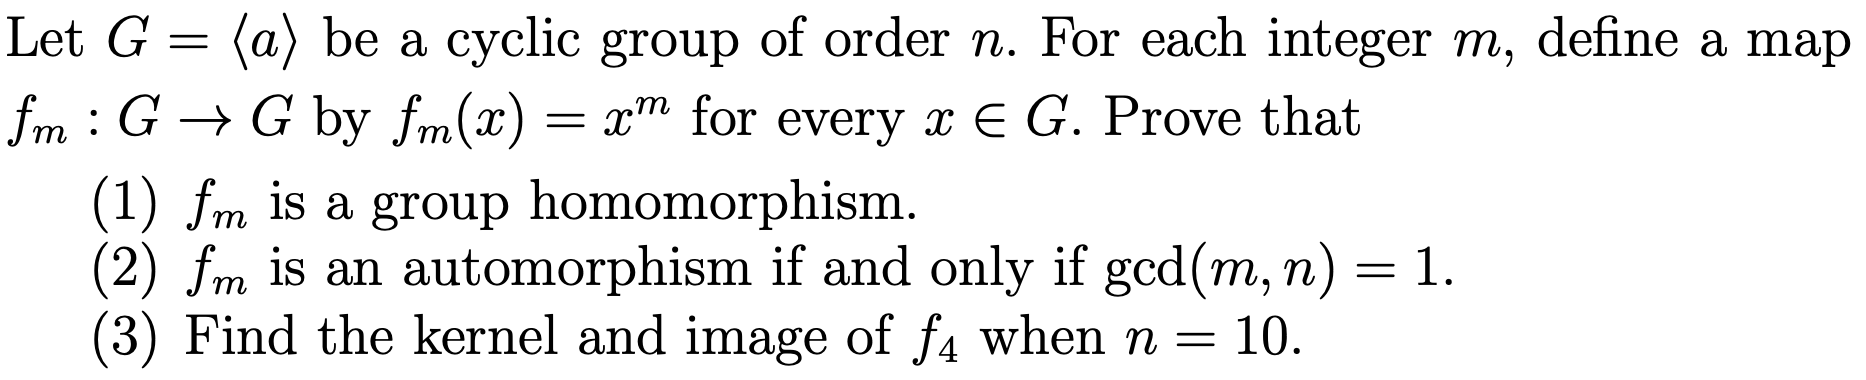 Let G
(a) be a cyclic group of order n. For each integer m, define a map
fm : G -> G by fm(x)
т
= x"" for every x E G. Prove that
(1) fm is a group homomorphism.
(2) fm is an automorphism if and only if gcd(m, n) = 1.
(3) Find the kernel and image of f4 whenn =
т
т
10.
